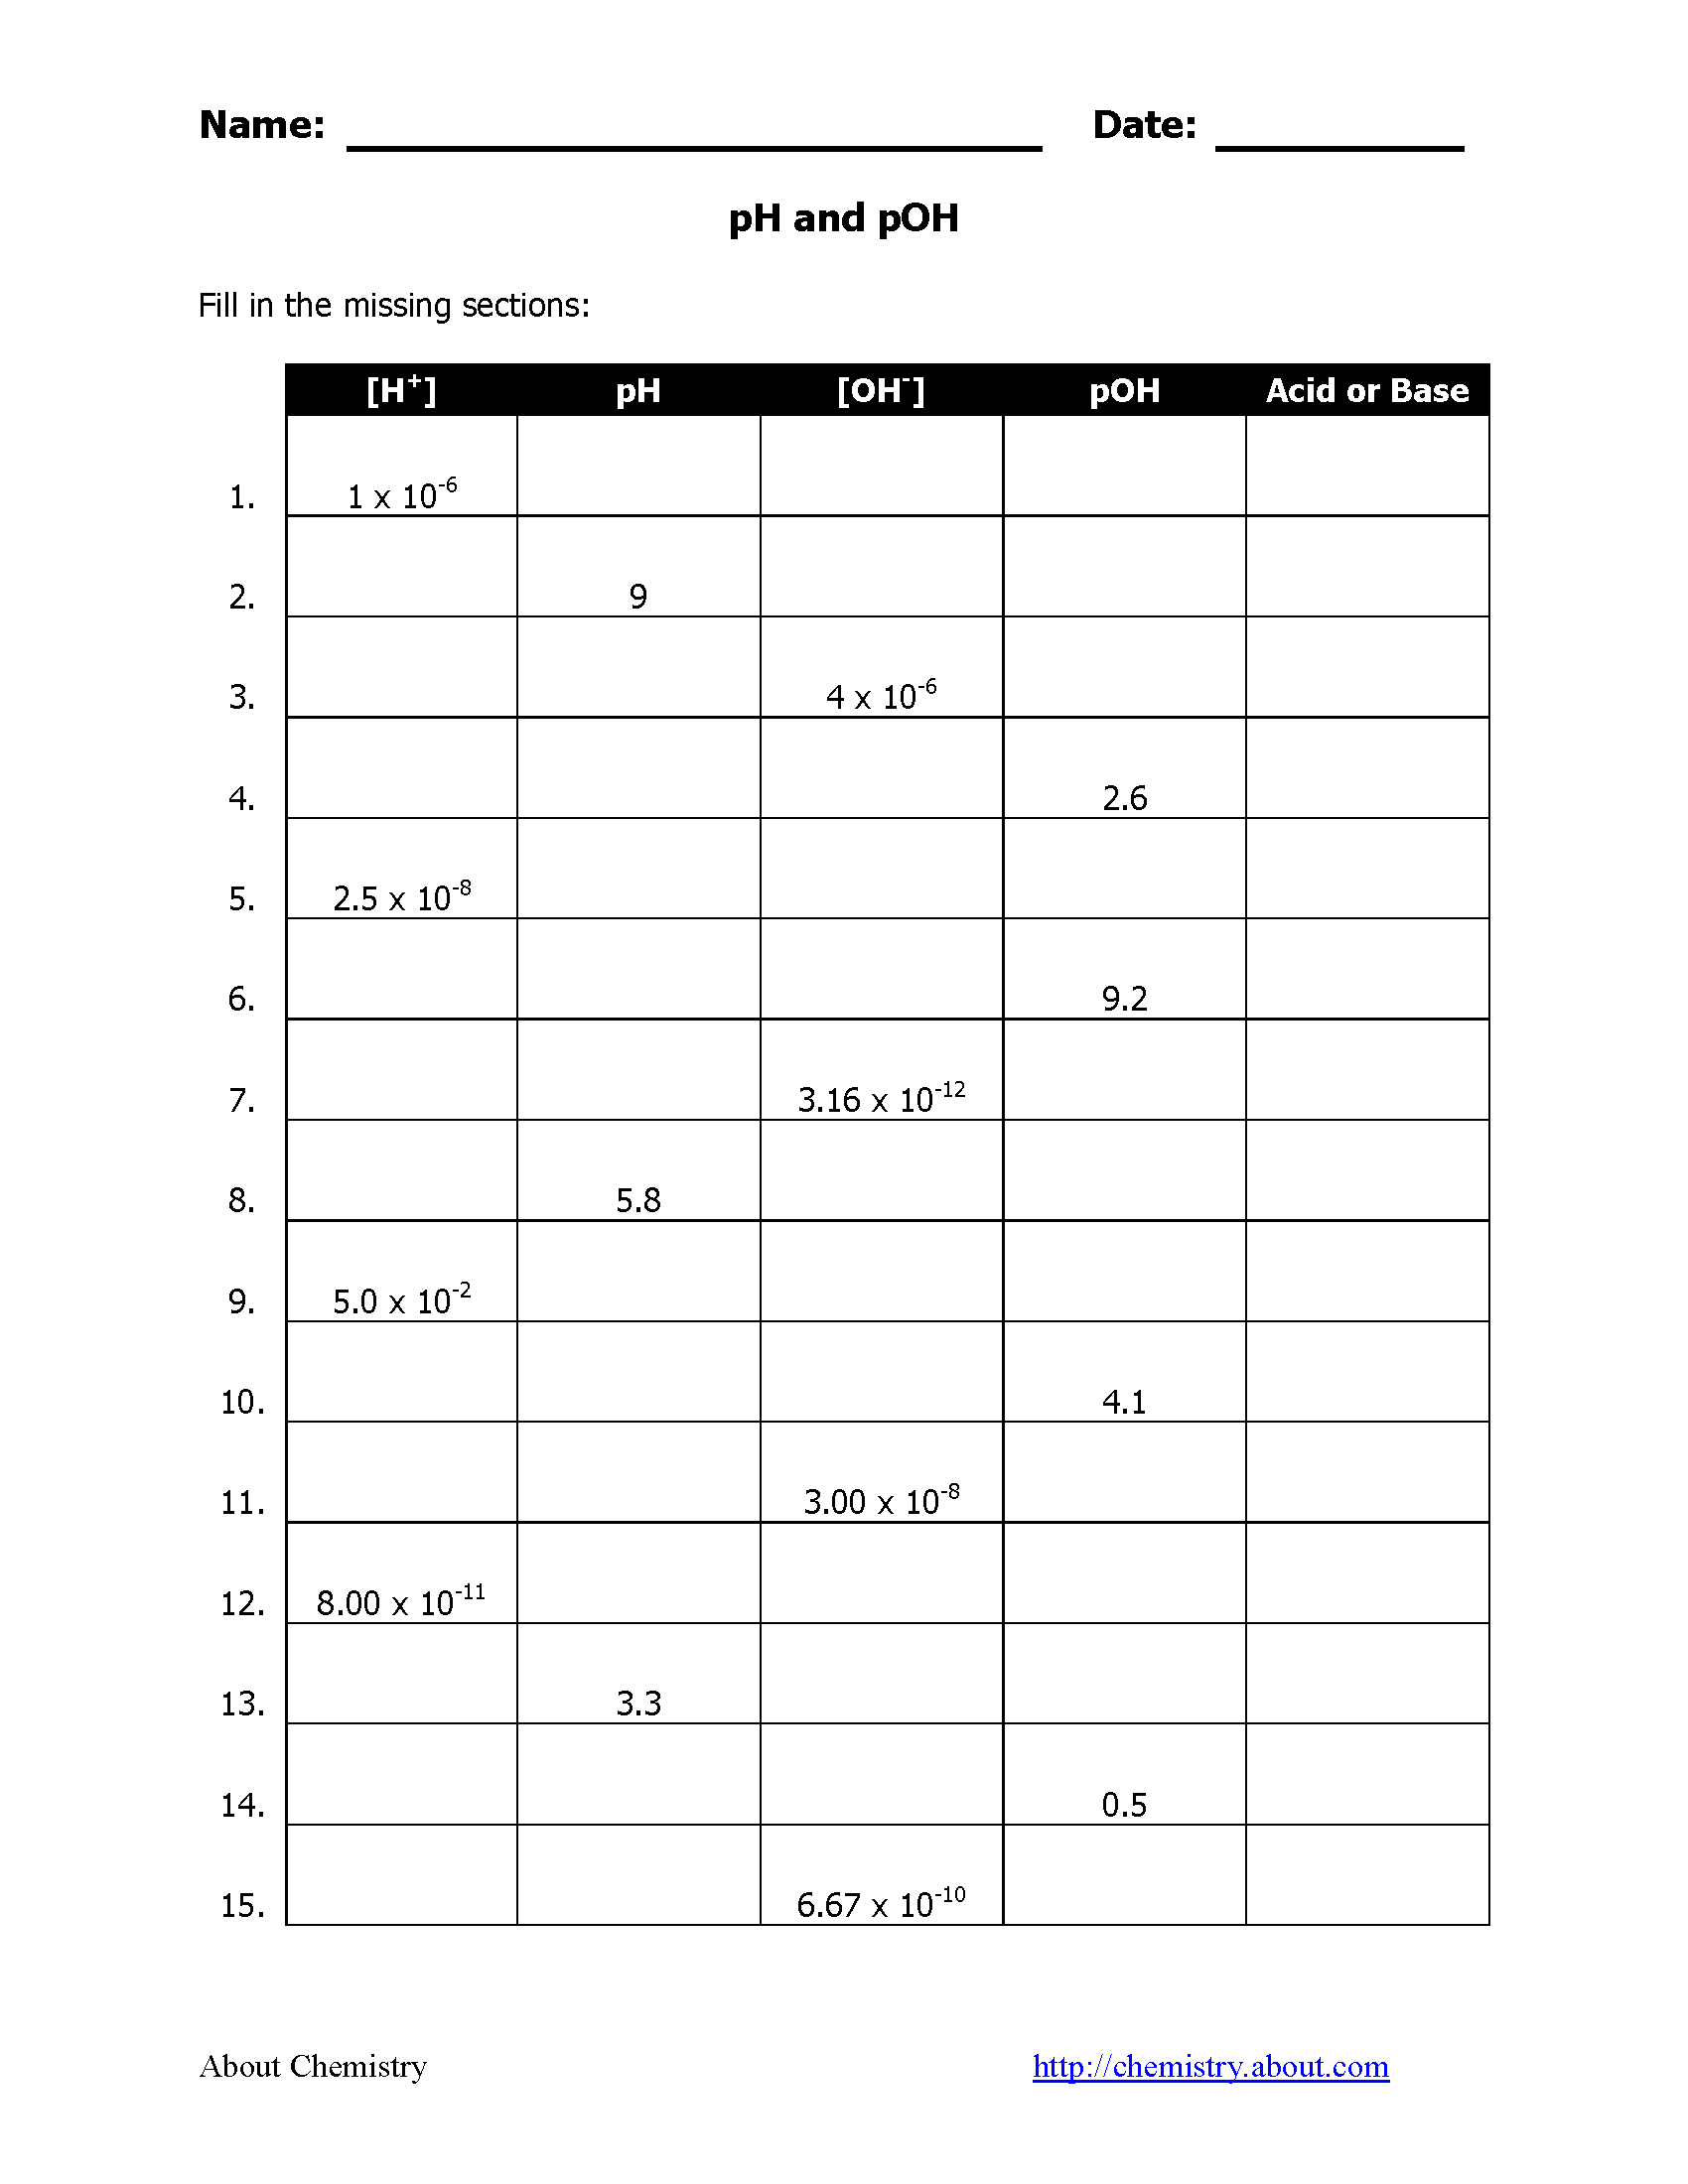 ph-and-poh-calculations-worksheet